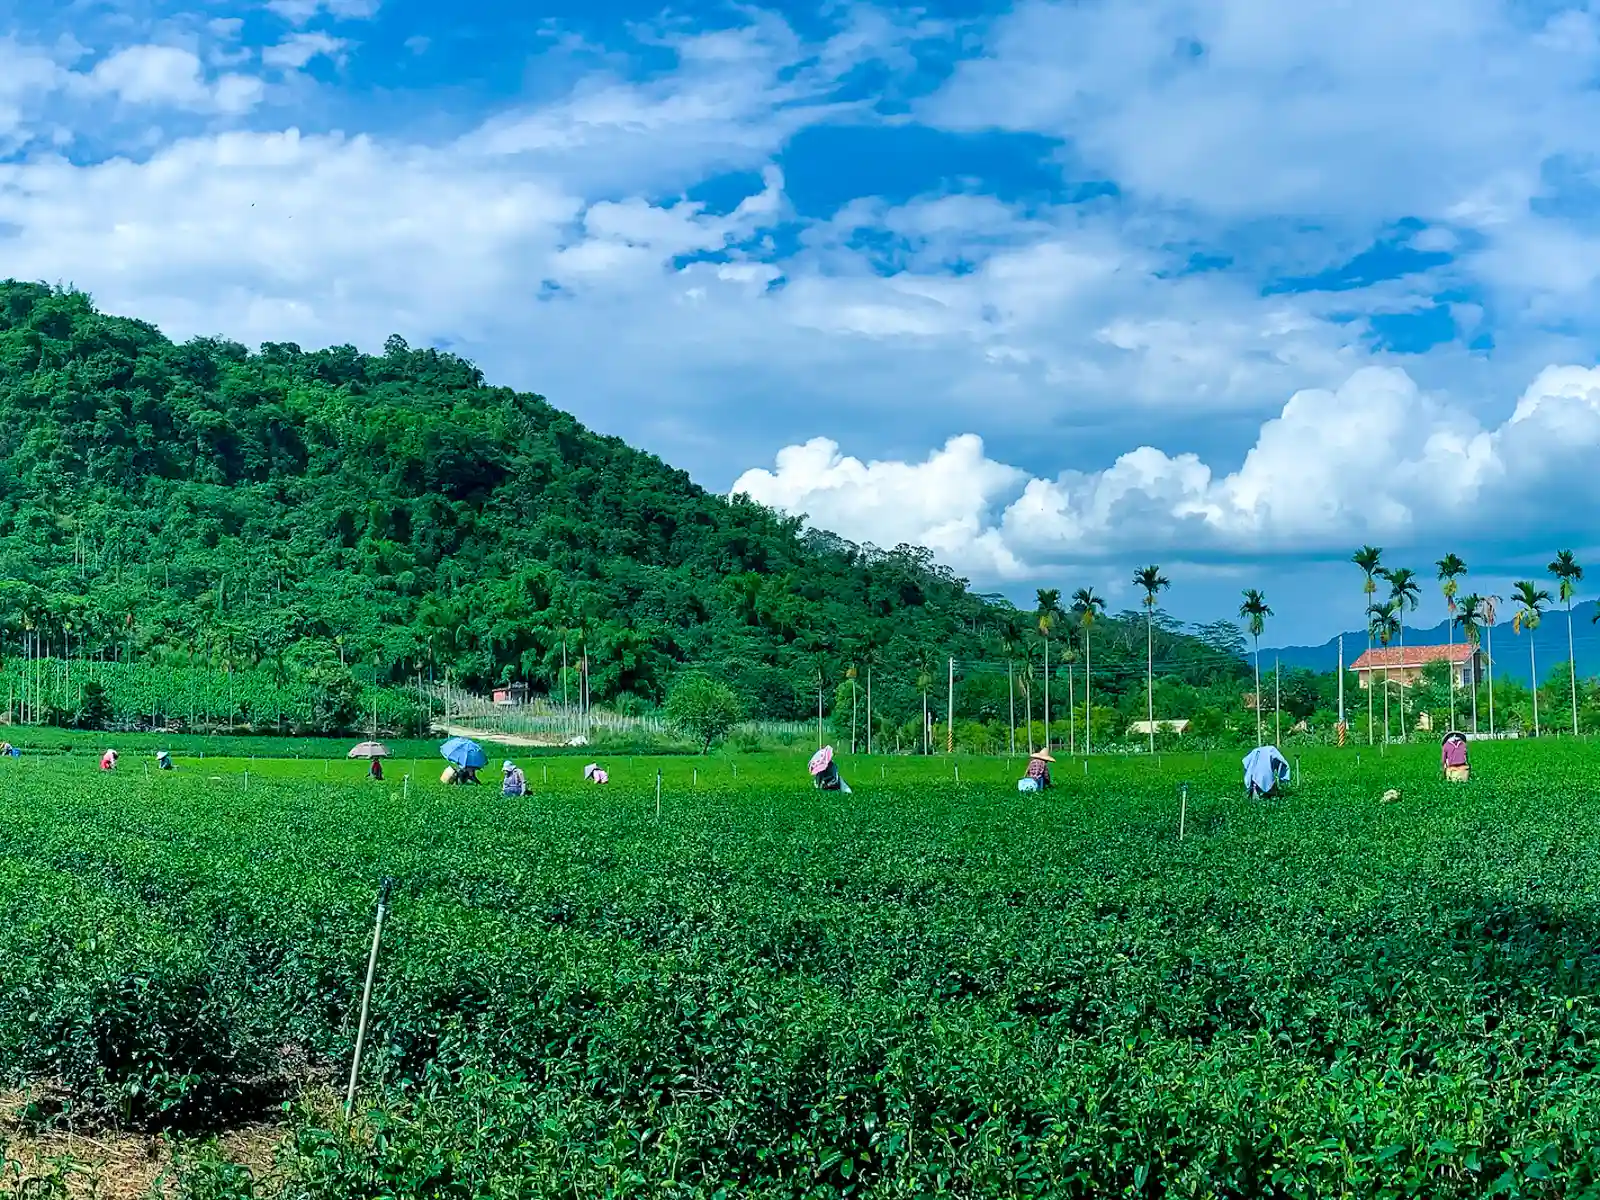 Rows of tea trees grow in a flat field surrounded by lush jungle.